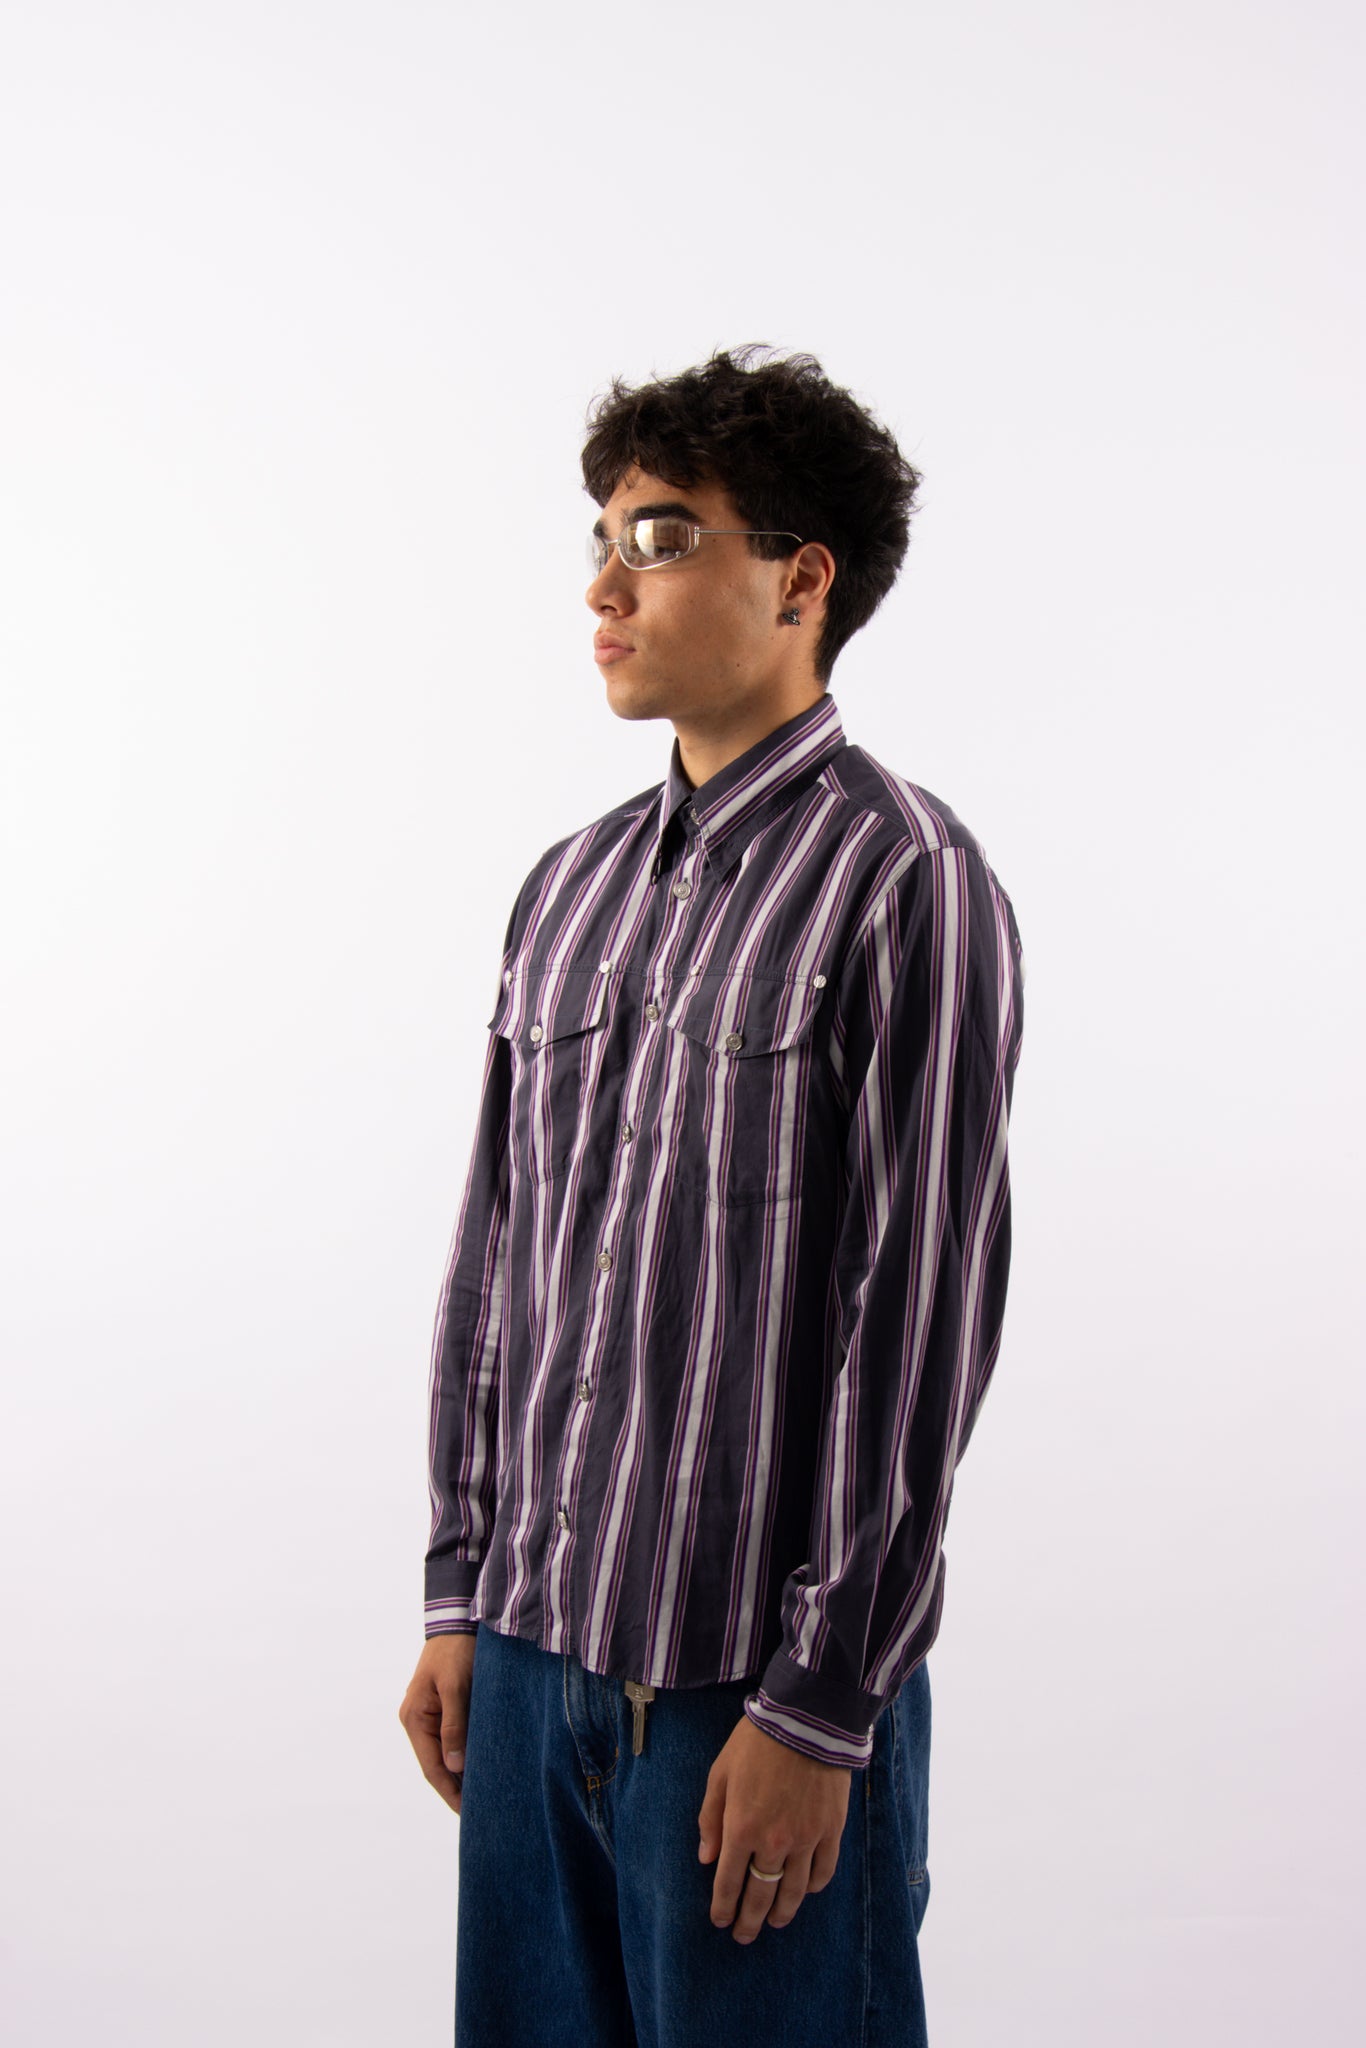 VERSACE PUPRLE STRIPED - Amsterdam Vintage Clothing | AVC